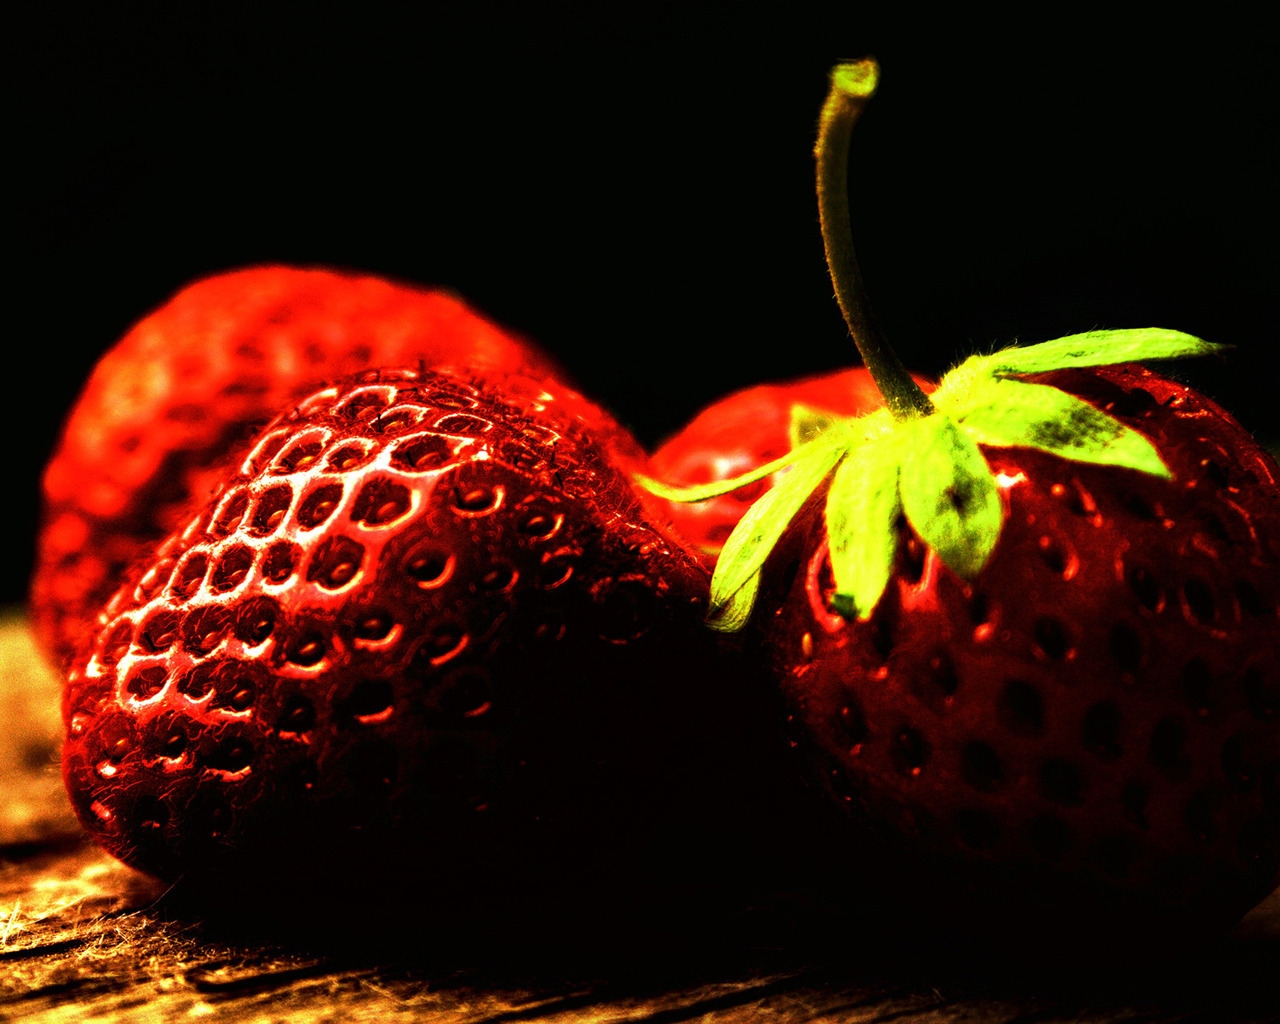 Strawberry for 1280 x 1024 resolution